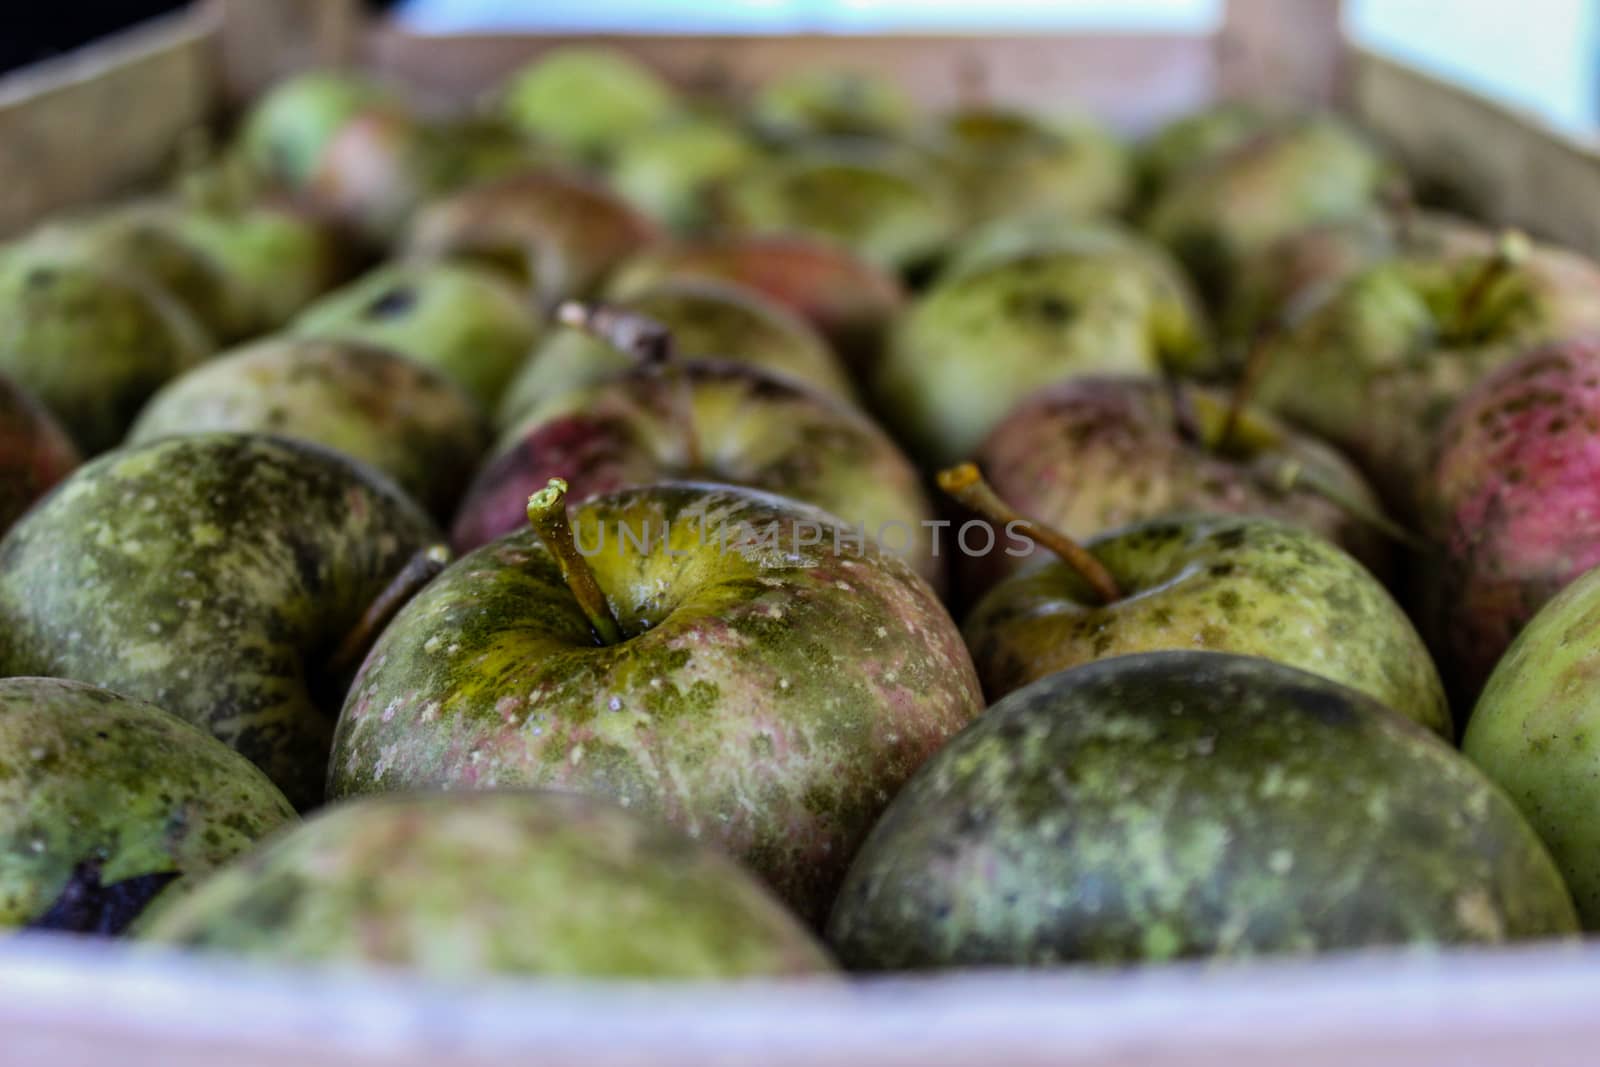 Homemade apples of different sizes perfectly stacked in a crate. Apples have various stains and markings on them. Zavidovici, Bosnia and Herzegovina.